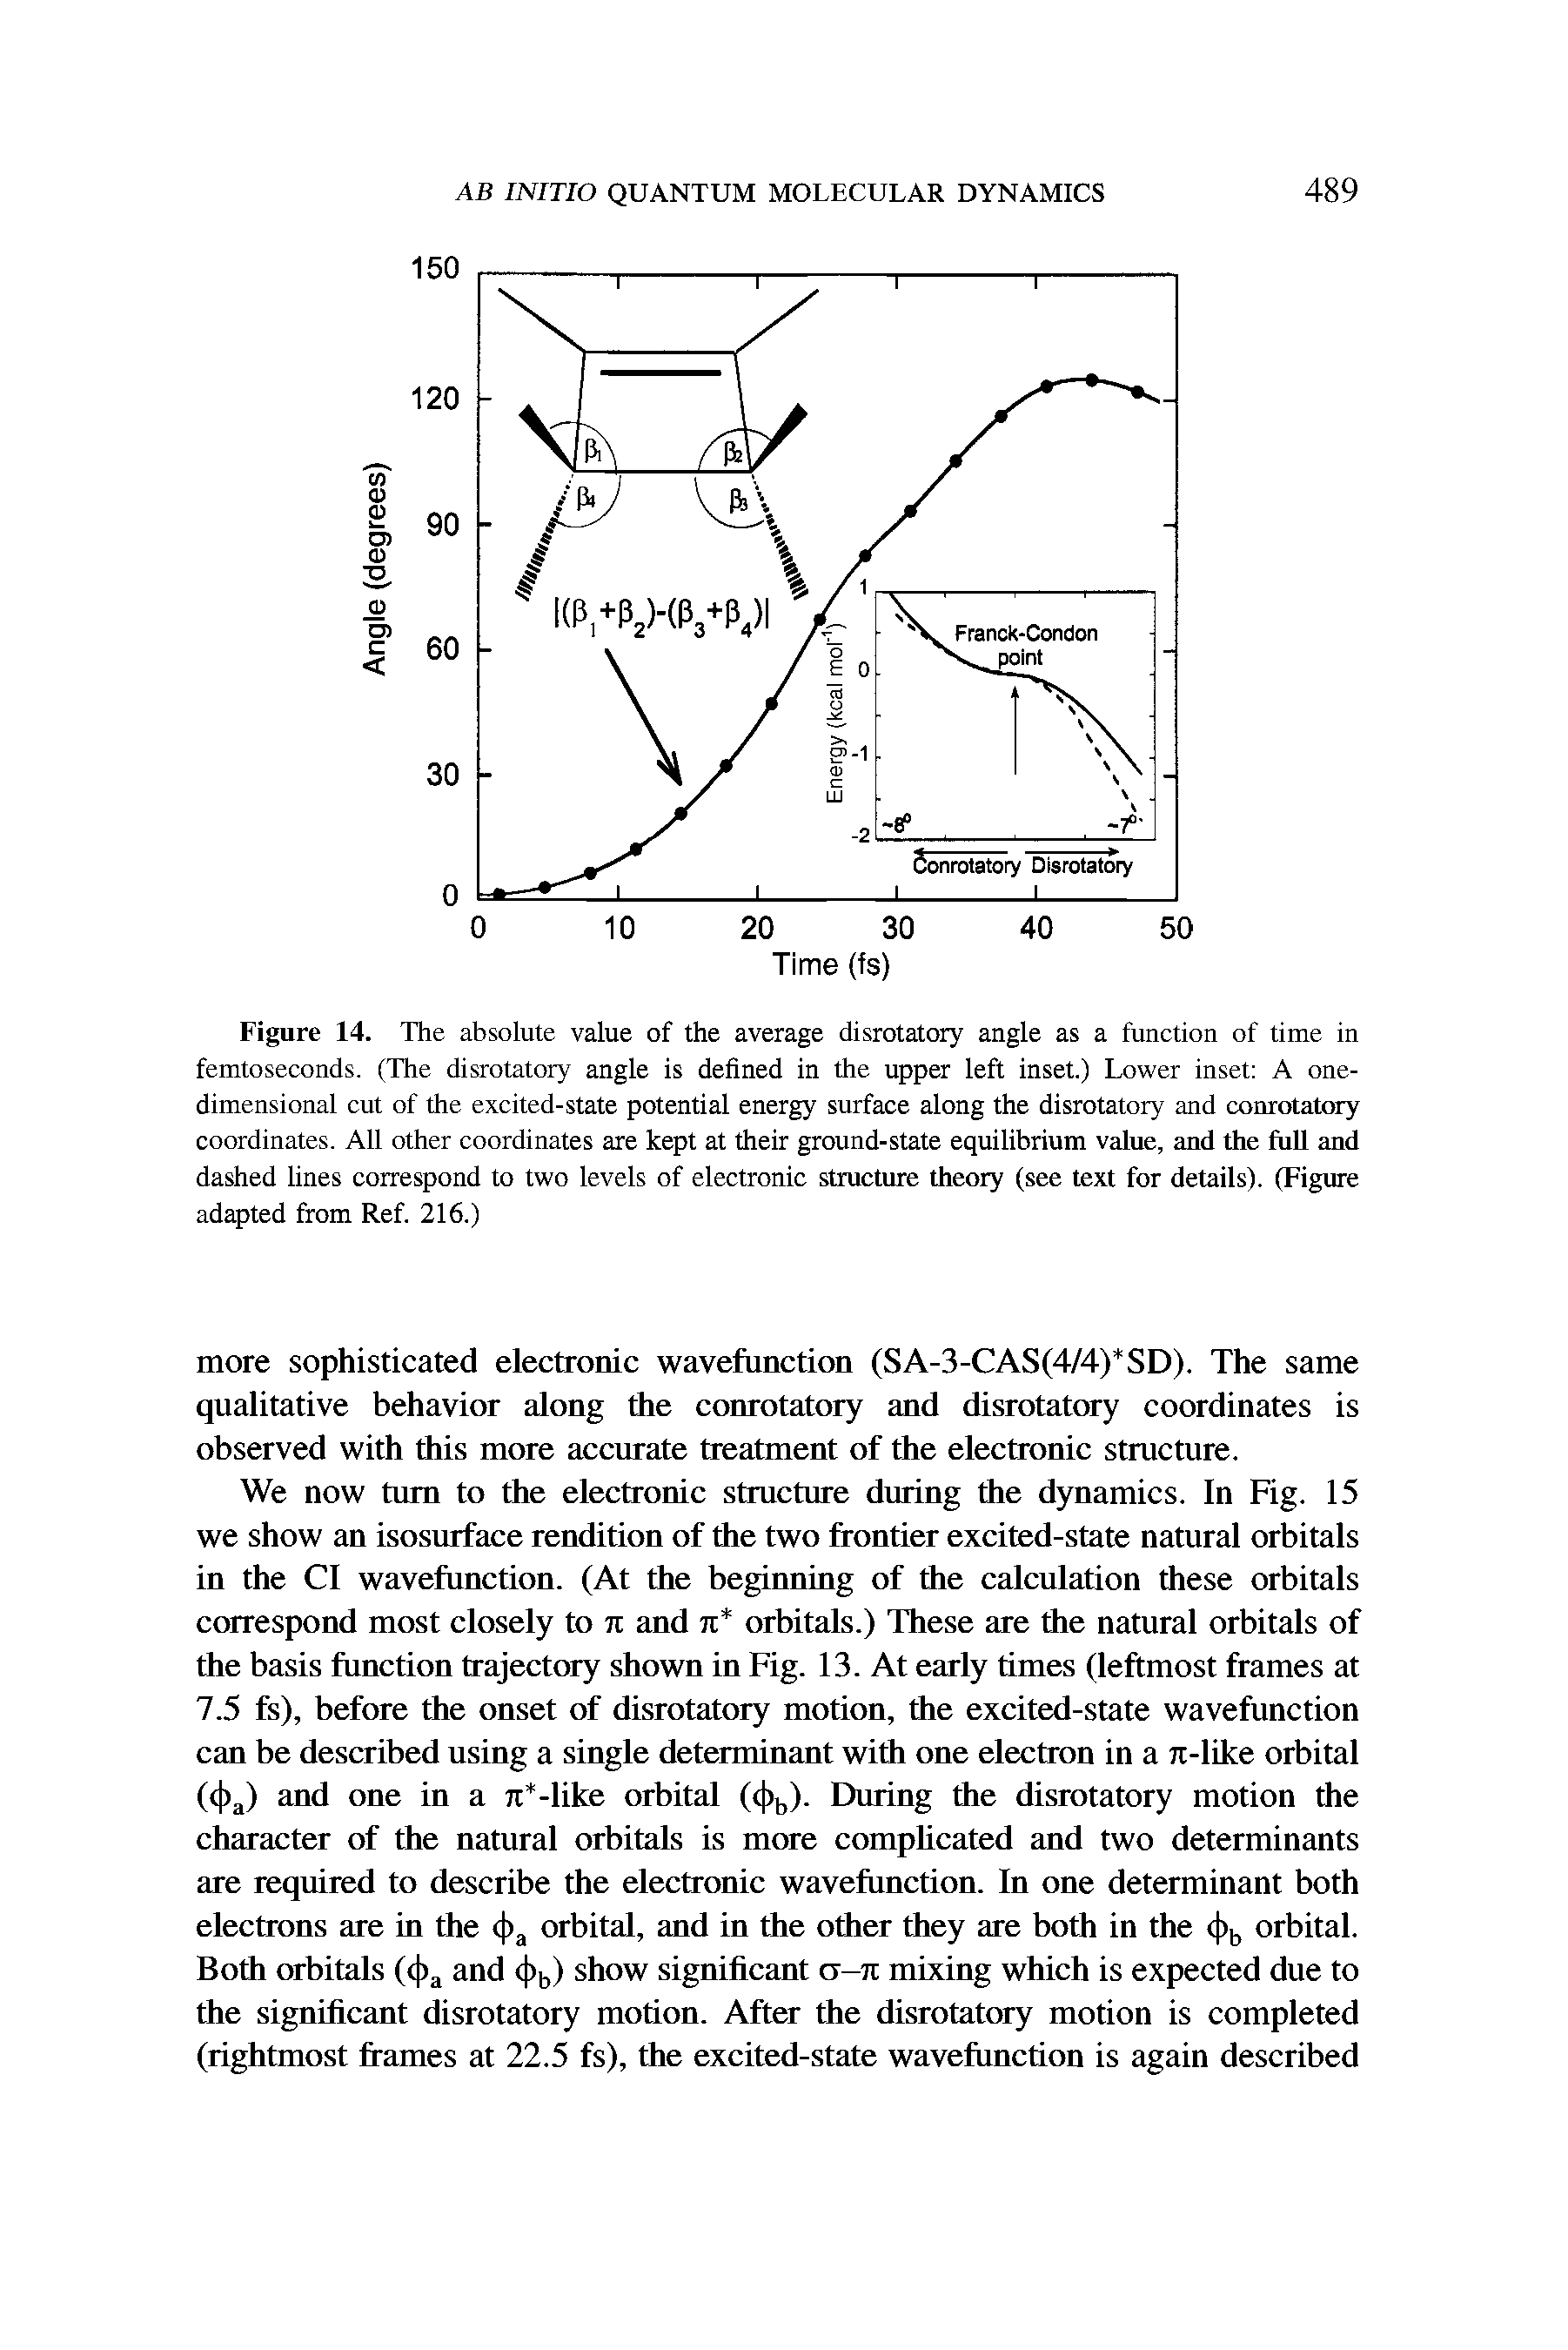 Figure 14. The absolute value of the average disrotatory angle as a function of time in femtoseconds. (The disrotatory angle is defined in the upper left inset.) Lower inset A onedimensional cut of the excited-state potential energy surface along the disrotatory and conrotatory coordinates. All other coordinates are kept at their ground-state equilibrium value, and the full and dashed lines correspond to two levels of electronic structure theory (see text for details). (Figure adapted from Ref. 216.)...